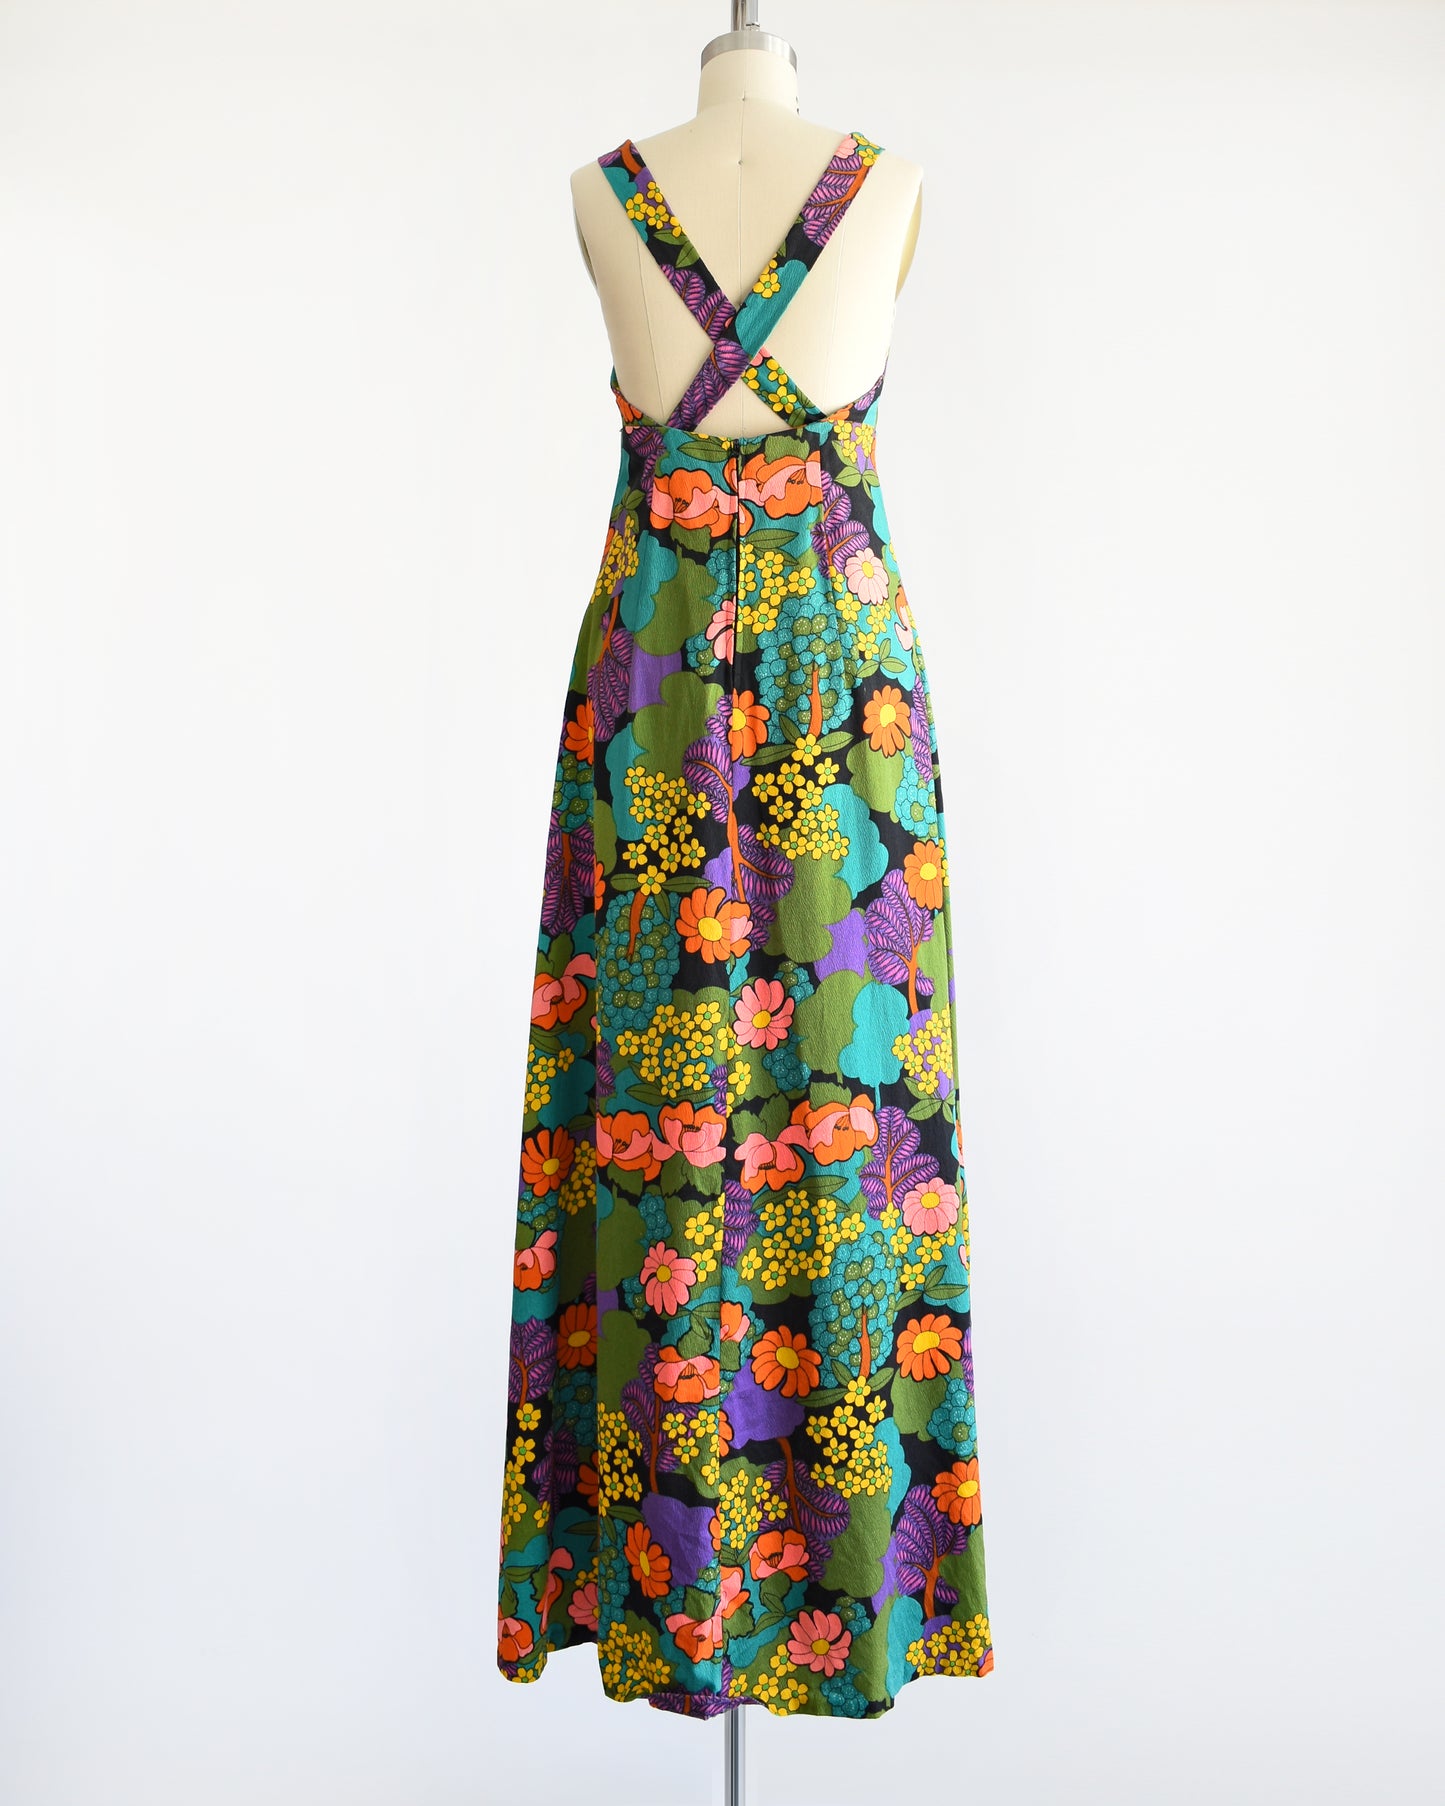 Back view of a vintage 70s floral maxi dress that is black and has a vibrant flower power print in greens, blue, peach, orange, yellow, purple, and white. Criss cross straps on the back. Dress is on dress form.